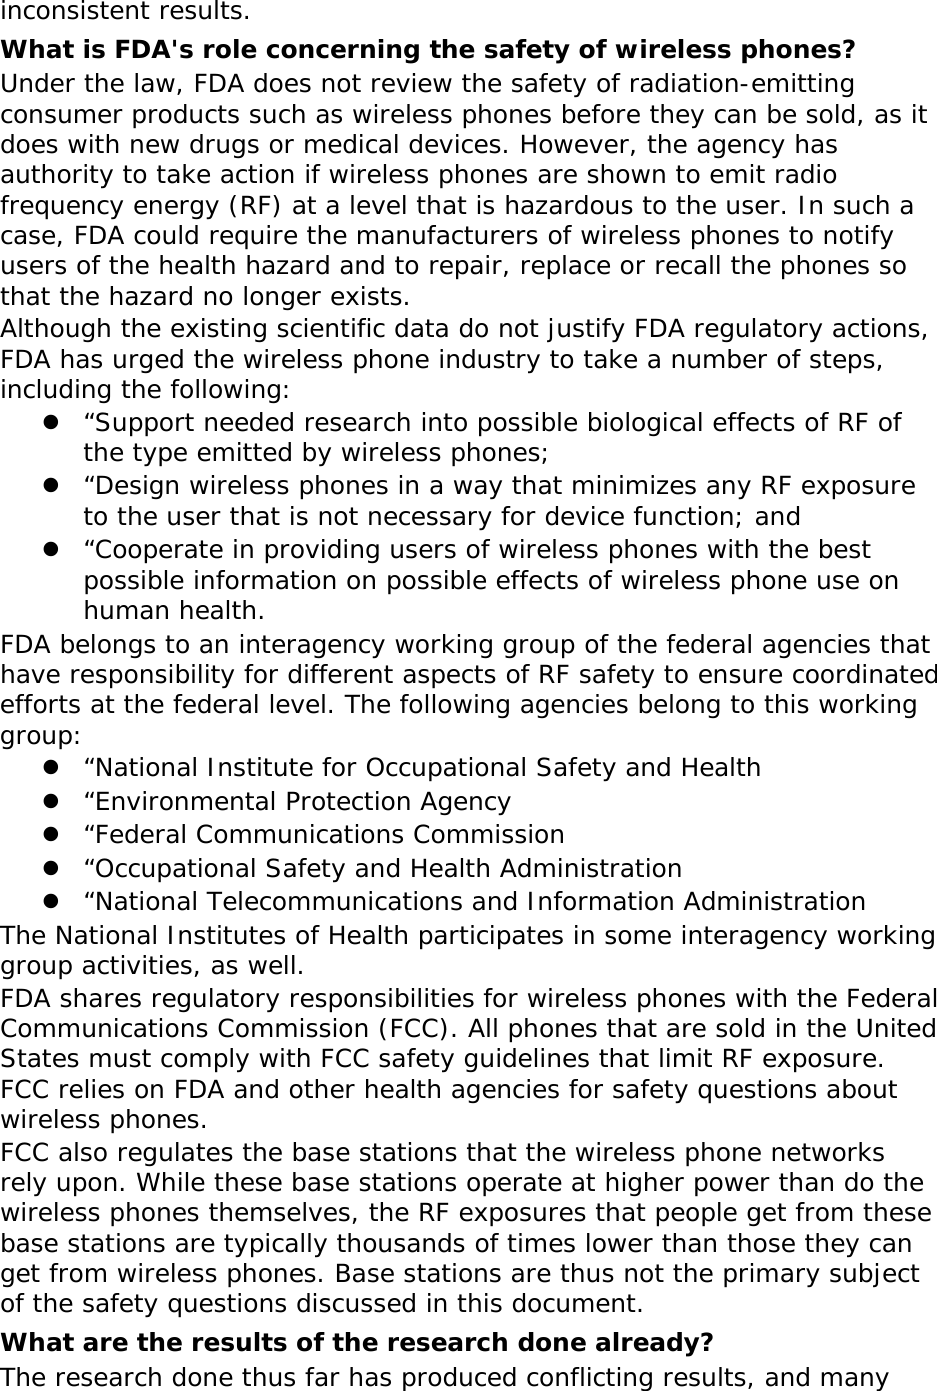 inconsistent results. What is FDA&apos;s role concerning the safety of wireless phones? Under the law, FDA does not review the safety of radiation-emitting consumer products such as wireless phones before they can be sold, as it does with new drugs or medical devices. However, the agency has authority to take action if wireless phones are shown to emit radio frequency energy (RF) at a level that is hazardous to the user. In such a case, FDA could require the manufacturers of wireless phones to notify users of the health hazard and to repair, replace or recall the phones so that the hazard no longer exists. Although the existing scientific data do not justify FDA regulatory actions, FDA has urged the wireless phone industry to take a number of steps, including the following:  “Support needed research into possible biological effects of RF of the type emitted by wireless phones;  “Design wireless phones in a way that minimizes any RF exposure to the user that is not necessary for device function; and  “Cooperate in providing users of wireless phones with the best possible information on possible effects of wireless phone use on human health. FDA belongs to an interagency working group of the federal agencies that have responsibility for different aspects of RF safety to ensure coordinated efforts at the federal level. The following agencies belong to this working group:  “National Institute for Occupational Safety and Health  “Environmental Protection Agency  “Federal Communications Commission  “Occupational Safety and Health Administration  “National Telecommunications and Information Administration The National Institutes of Health participates in some interagency working group activities, as well. FDA shares regulatory responsibilities for wireless phones with the Federal Communications Commission (FCC). All phones that are sold in the United States must comply with FCC safety guidelines that limit RF exposure. FCC relies on FDA and other health agencies for safety questions about wireless phones. FCC also regulates the base stations that the wireless phone networks rely upon. While these base stations operate at higher power than do the wireless phones themselves, the RF exposures that people get from these base stations are typically thousands of times lower than those they can get from wireless phones. Base stations are thus not the primary subject of the safety questions discussed in this document. What are the results of the research done already? The research done thus far has produced conflicting results, and many 